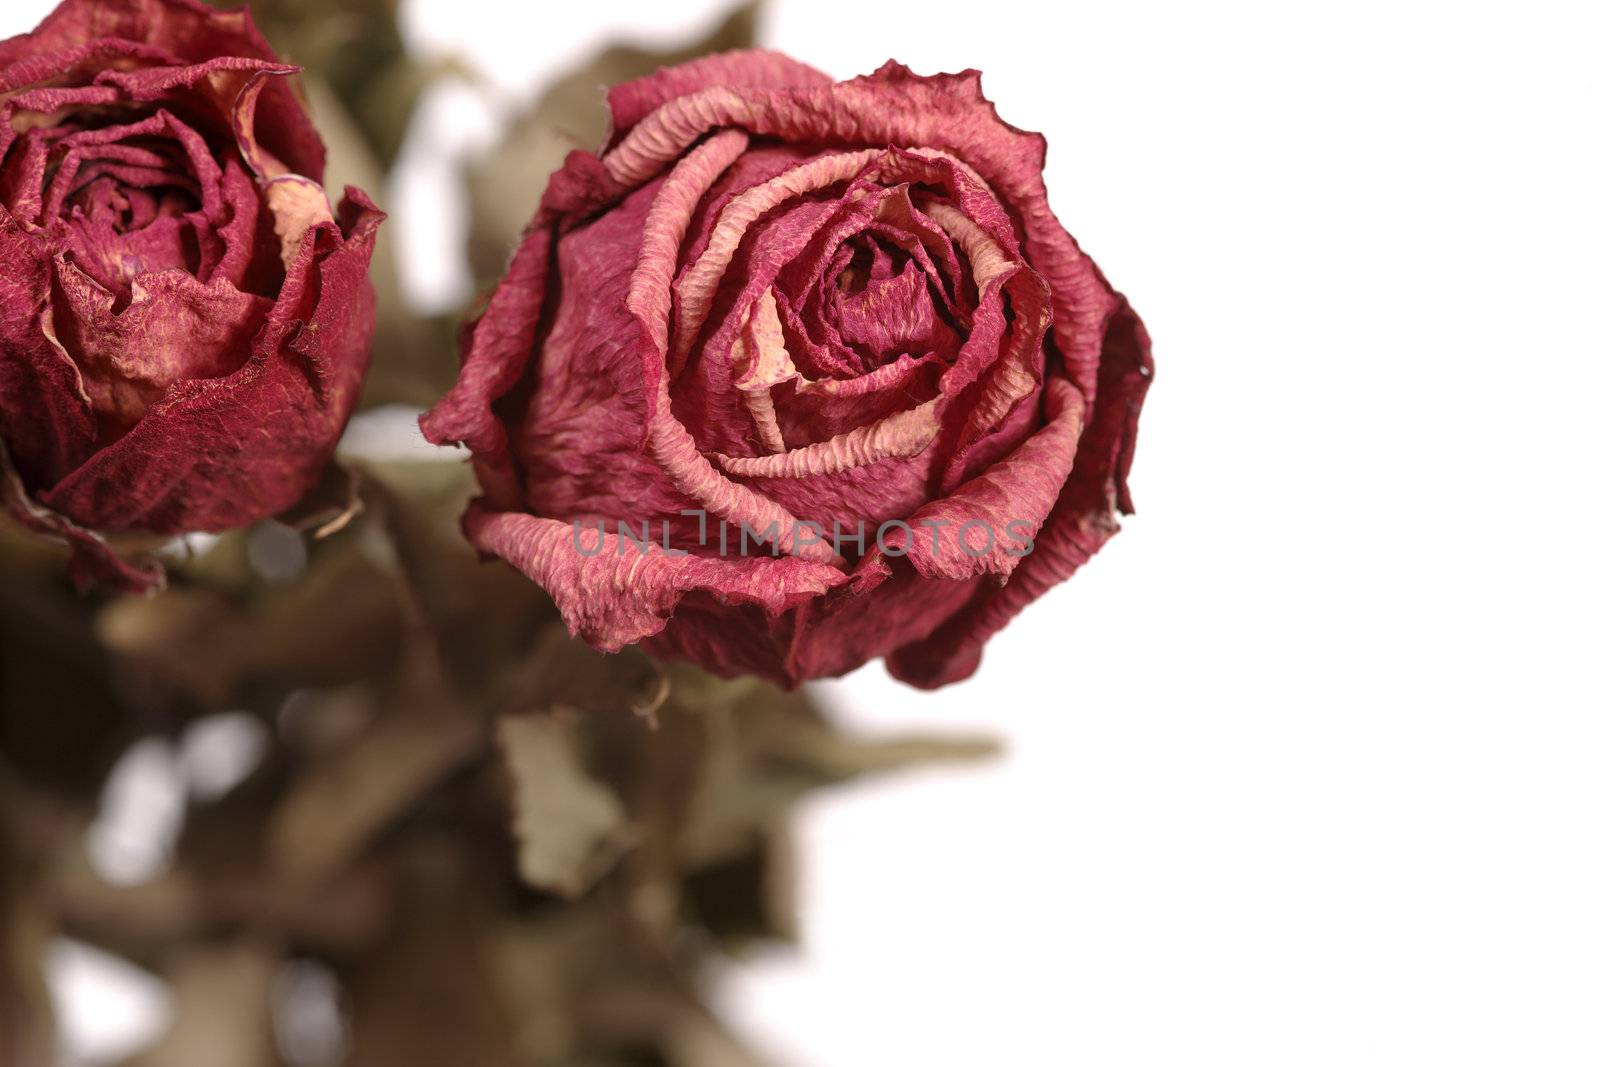 Shallow depth of field image of dried red roses.
